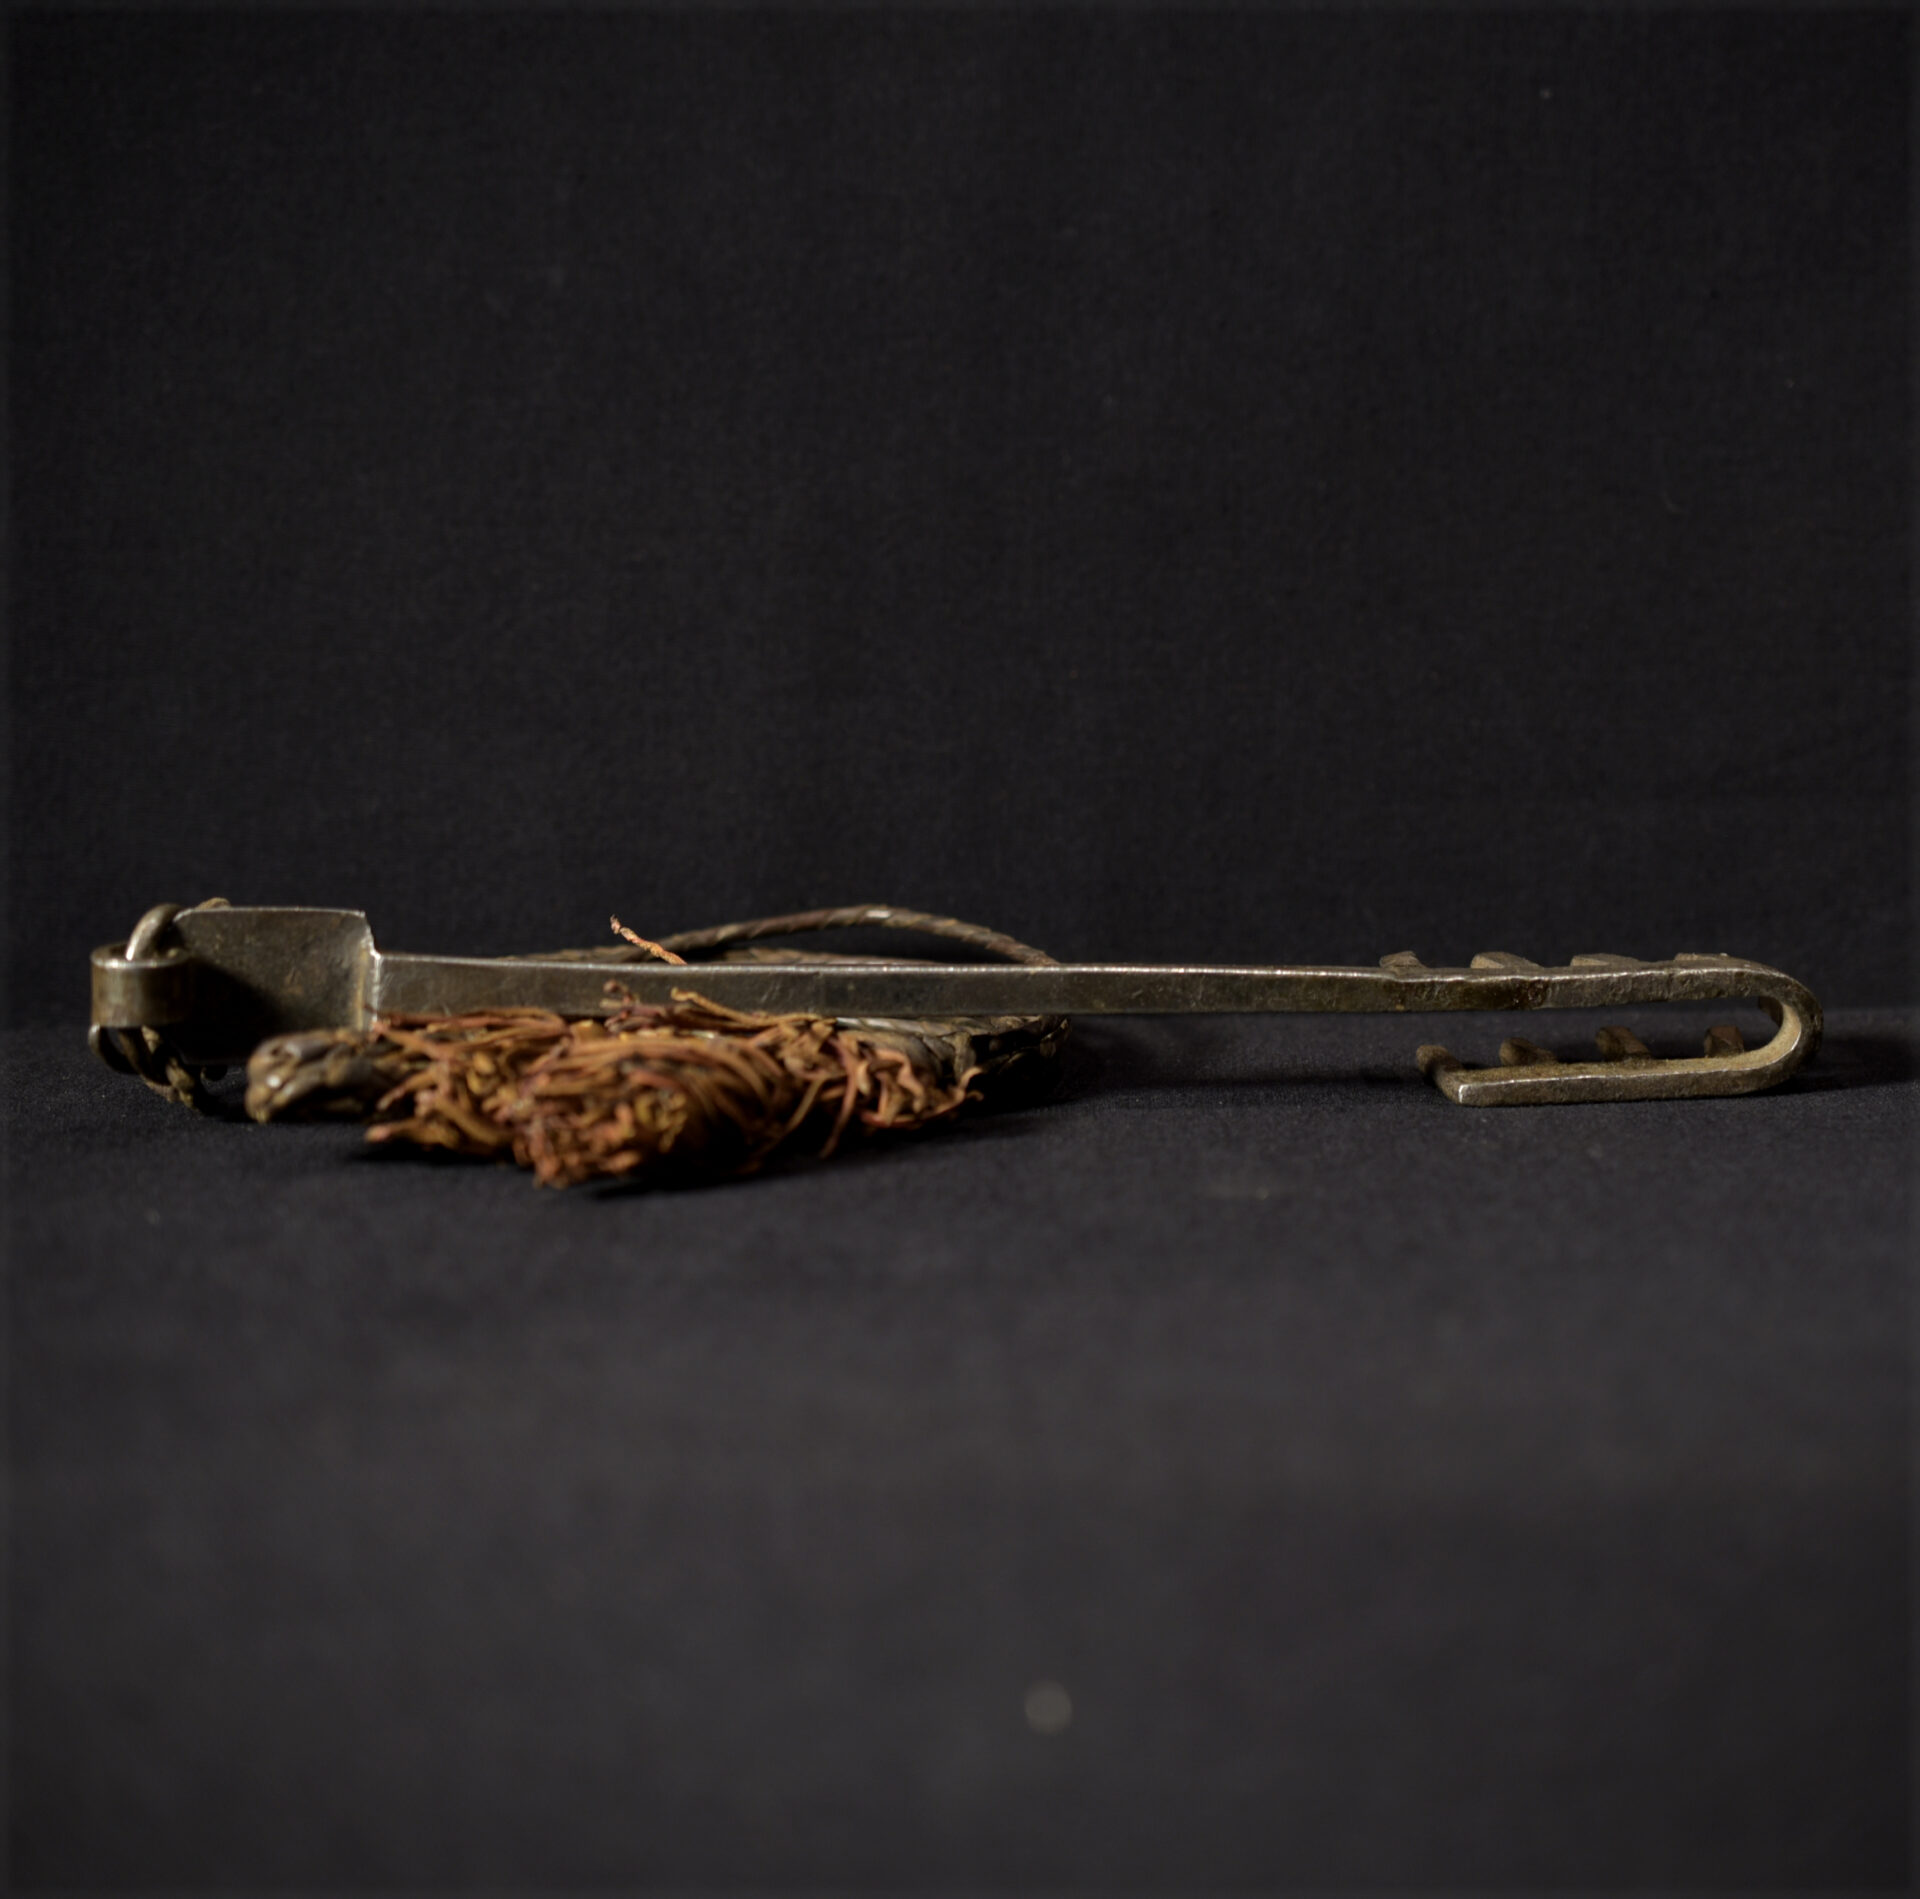 Old Berber Forged Iron Key – Morocco